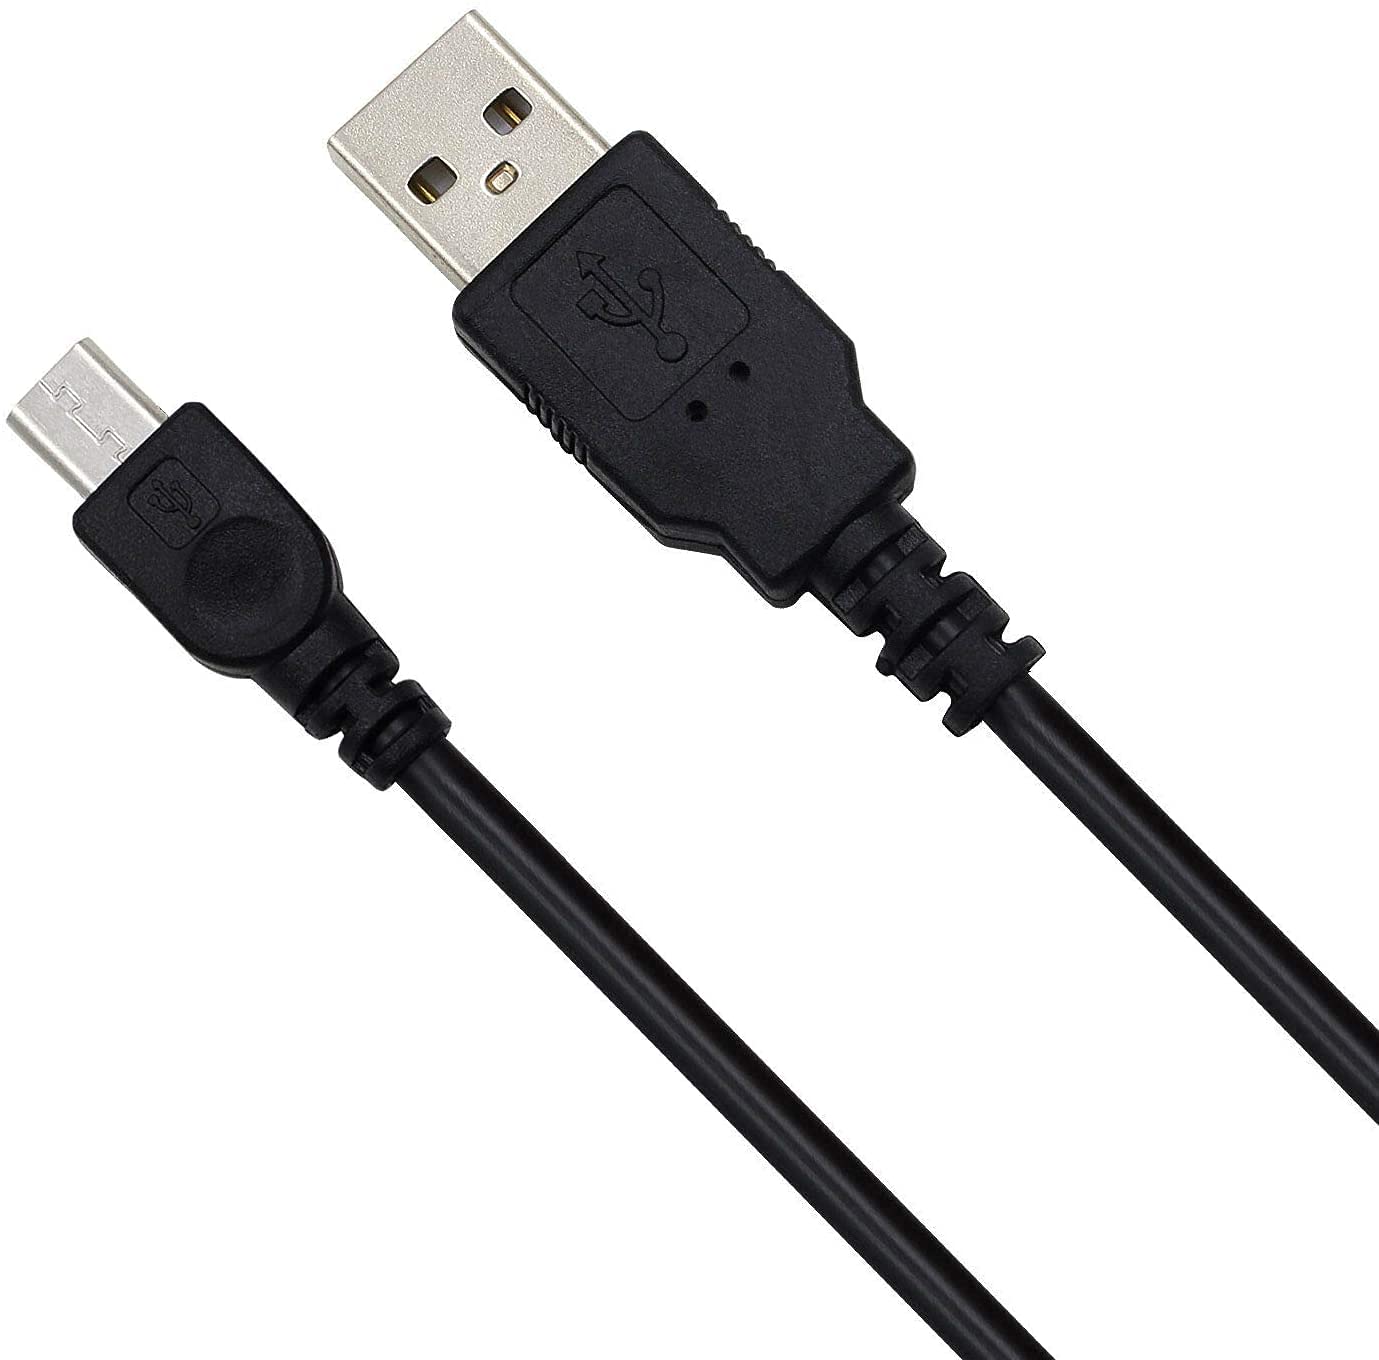 PPJ USB PC Charging Cable PC Laptop Charger Power Cord for NudeAudio Move M Portable Wireless Bluetooth Speaker AAV-PS003MTG AAV-PS003CLG PS003BKG PS003MTG